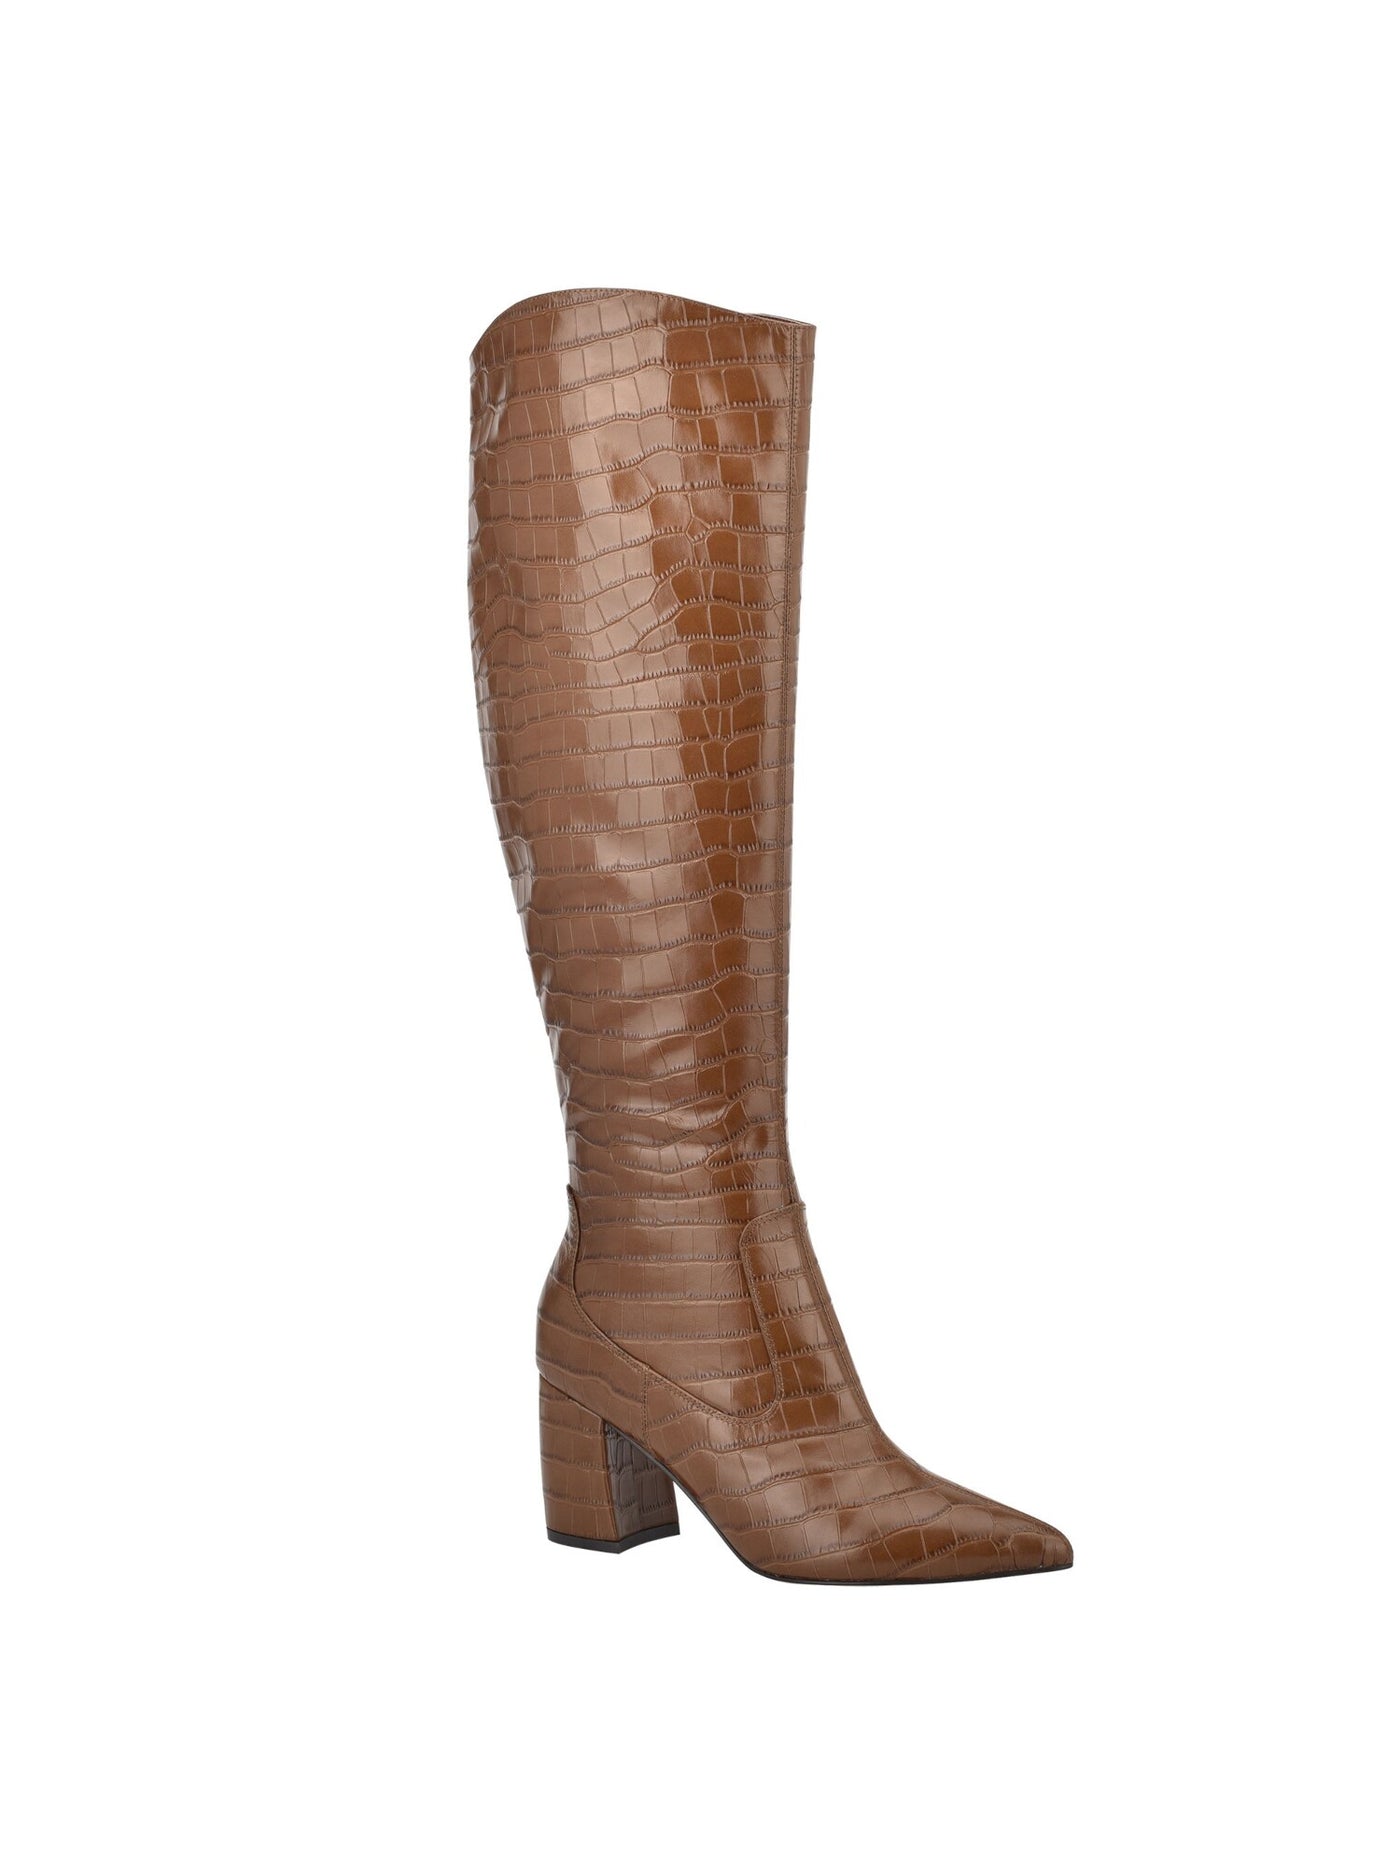 MARC FISHER Womens Brown Croc Padded Retie Pointed Toe Block Heel Zip-Up Leather Heeled Boots 9 M